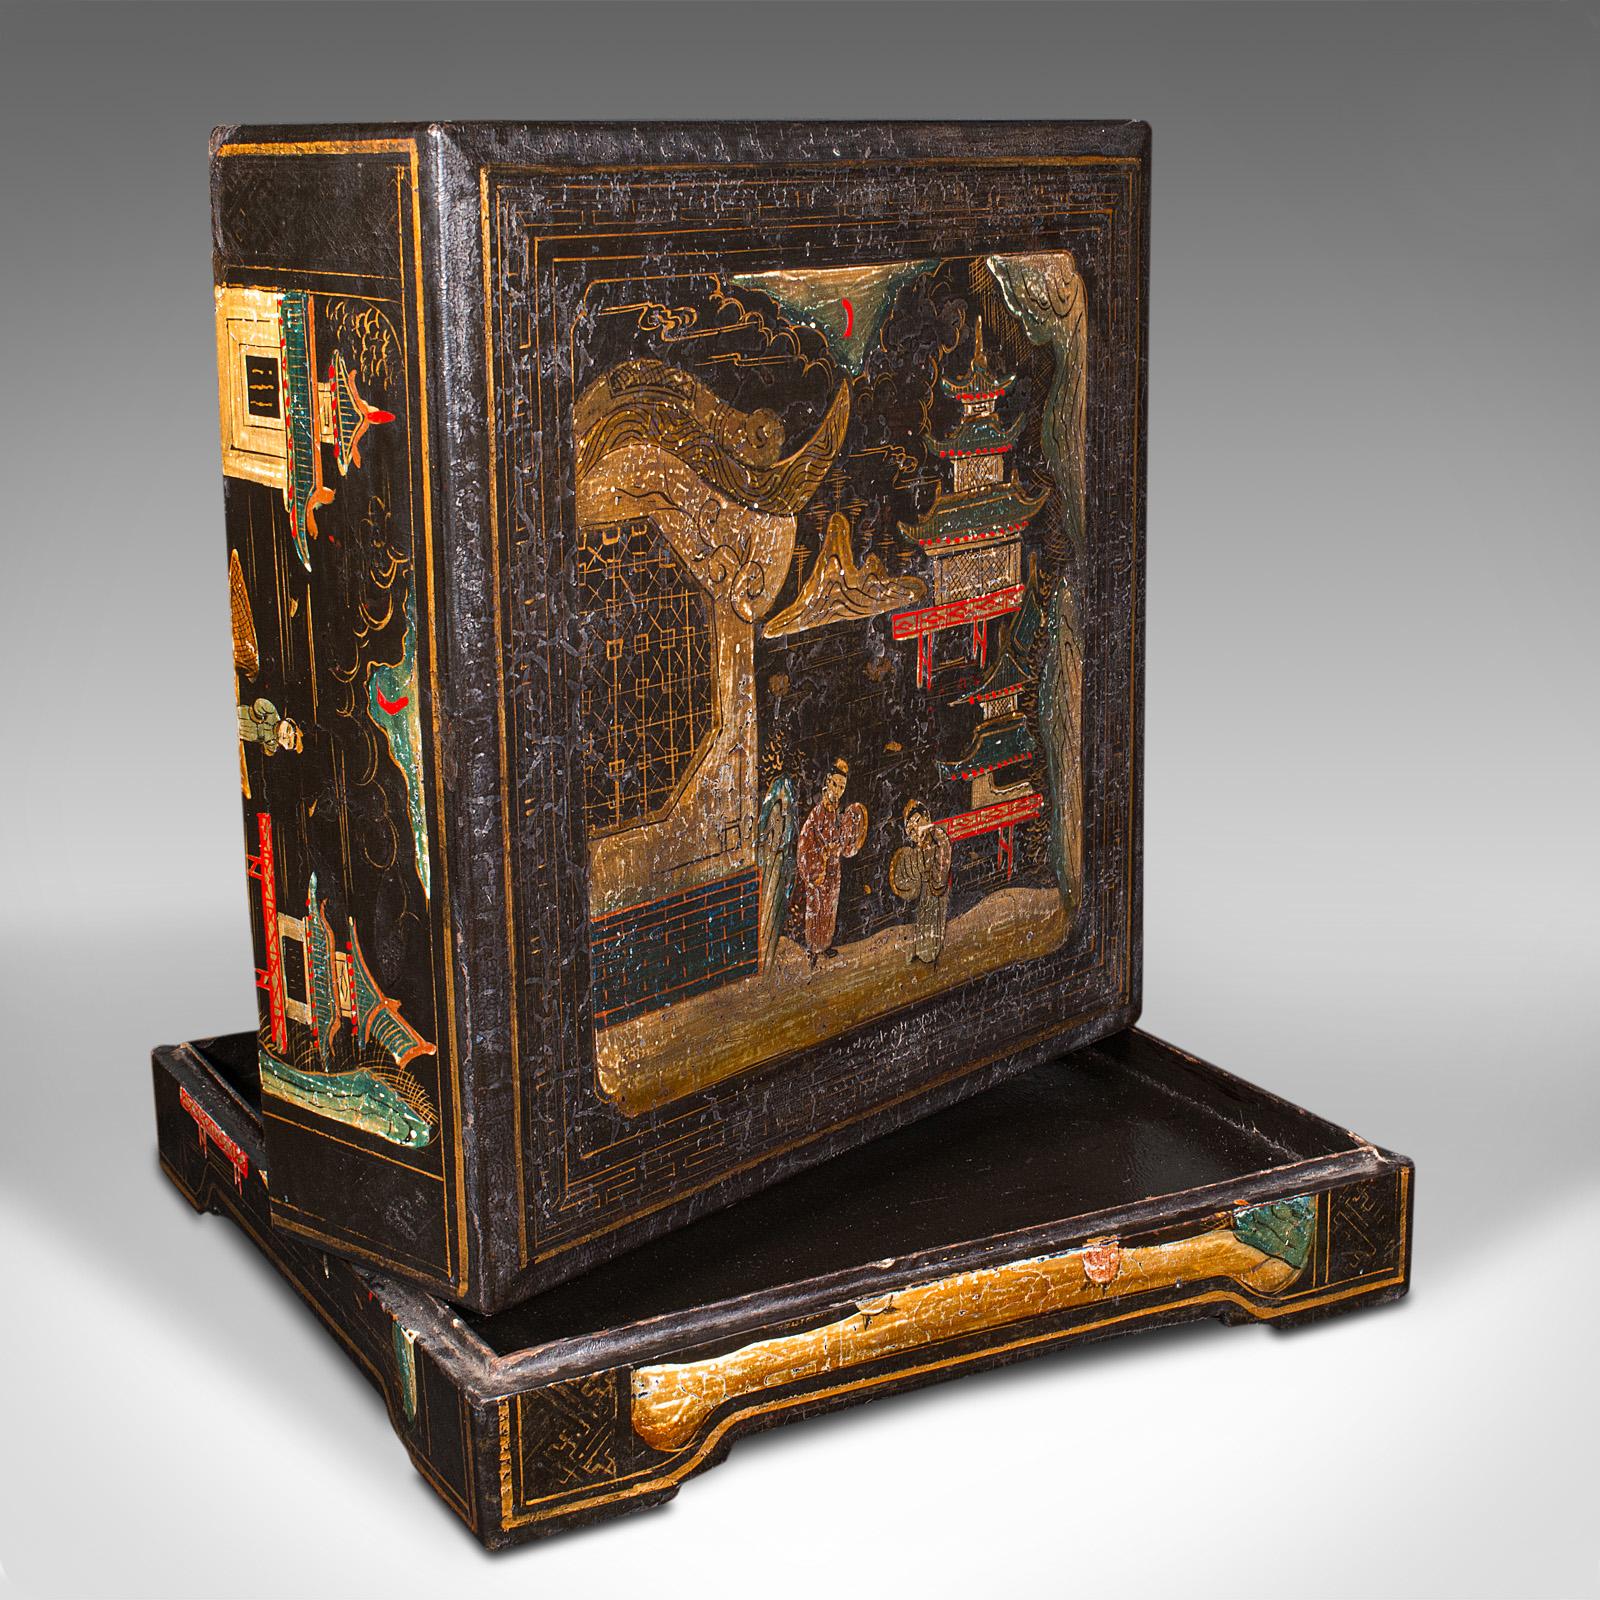 
This is an antique ceremonial presentation box. A Japanese, lacquered decorative serving case, dating to the early Victorian period, circa 1860.

Fascinating form and decorative appeal
Displays a desirable aged patina and in good original